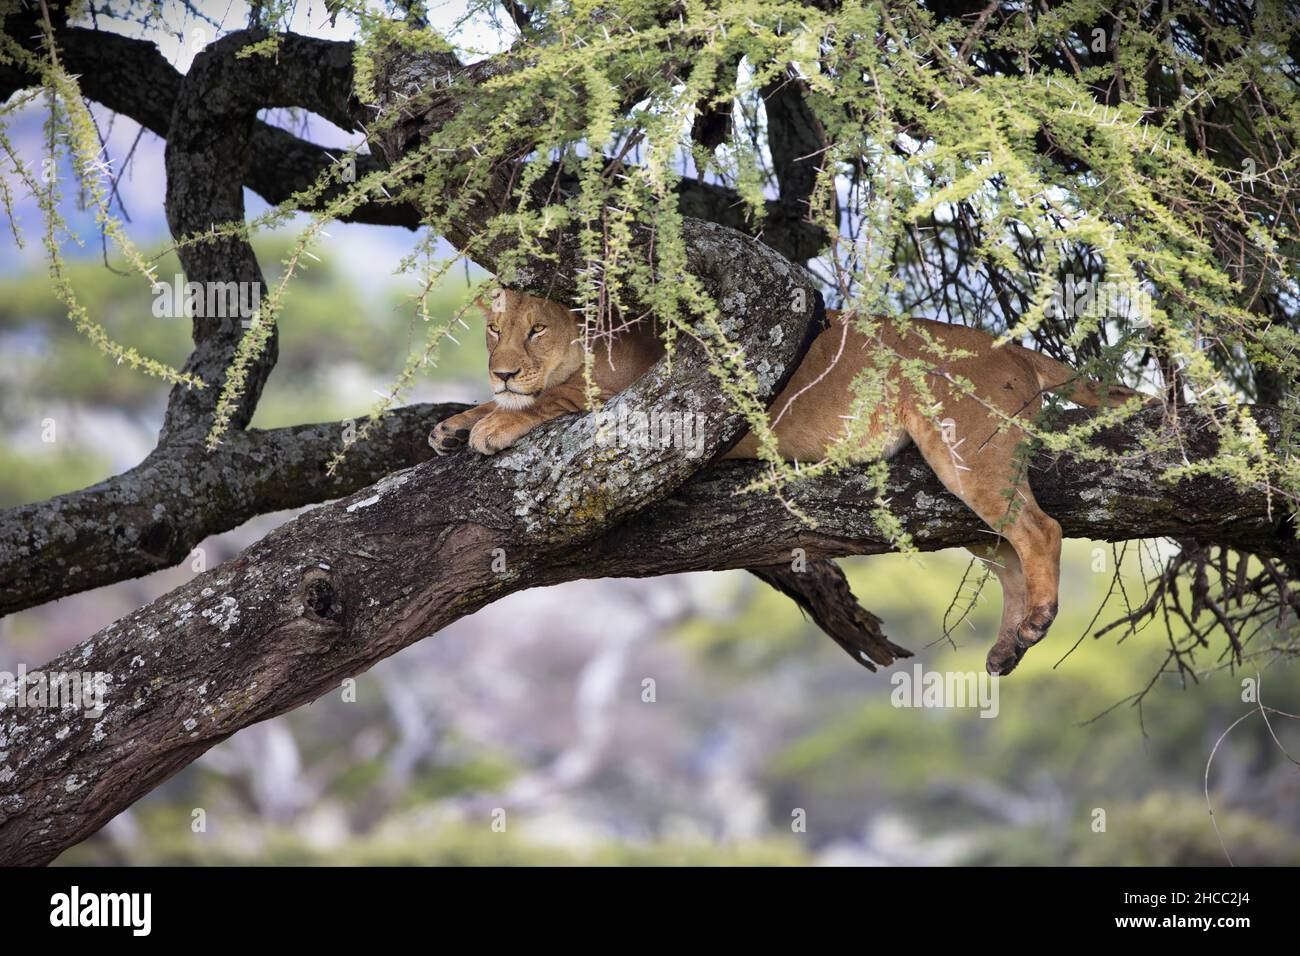 Lioness up in a tree in Tanzania nature during daylight Stock Photo